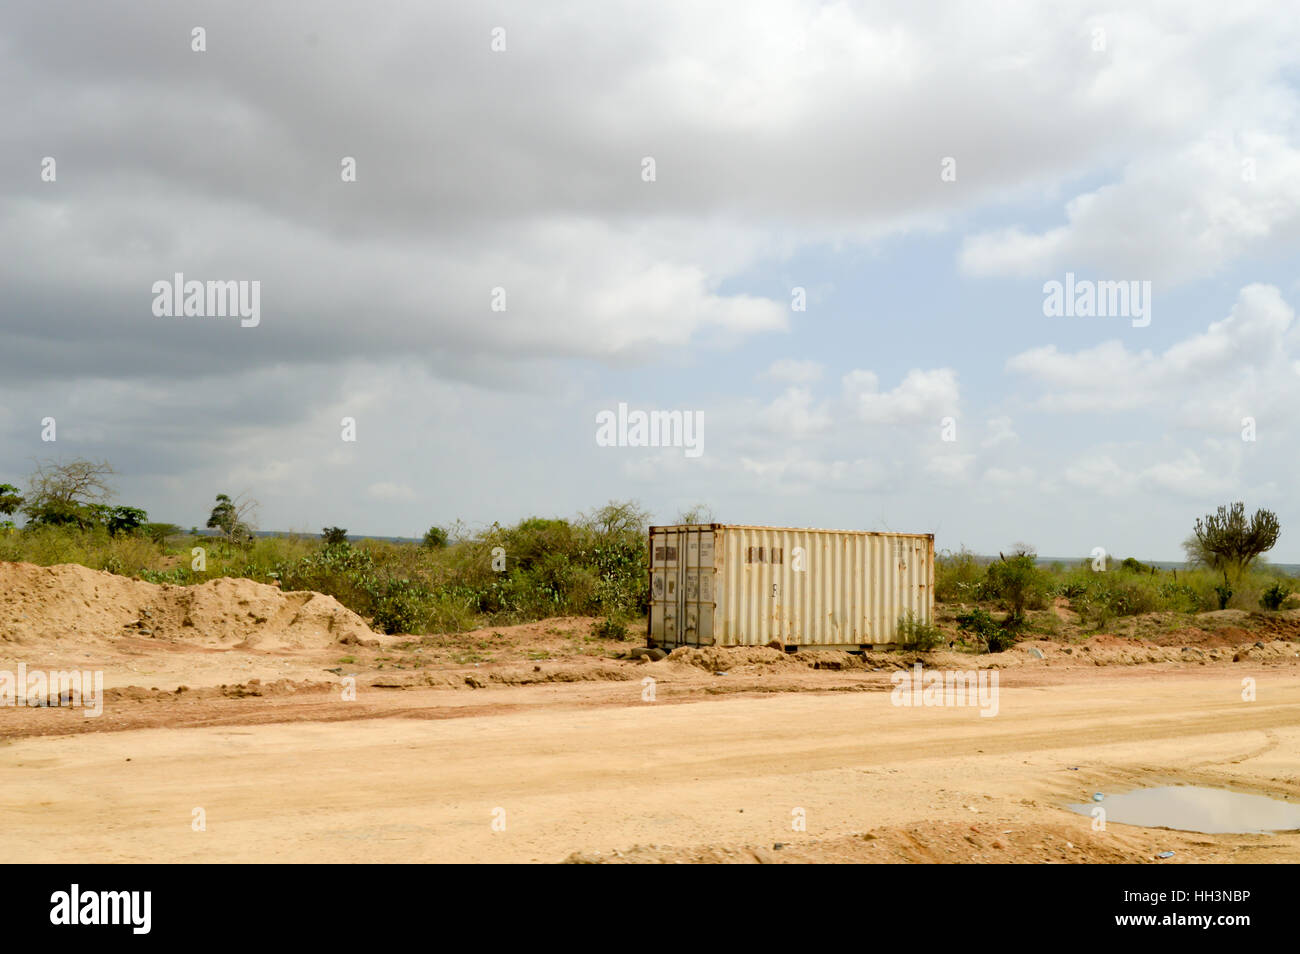 White container isolated in nature in Kenya Stock Photo